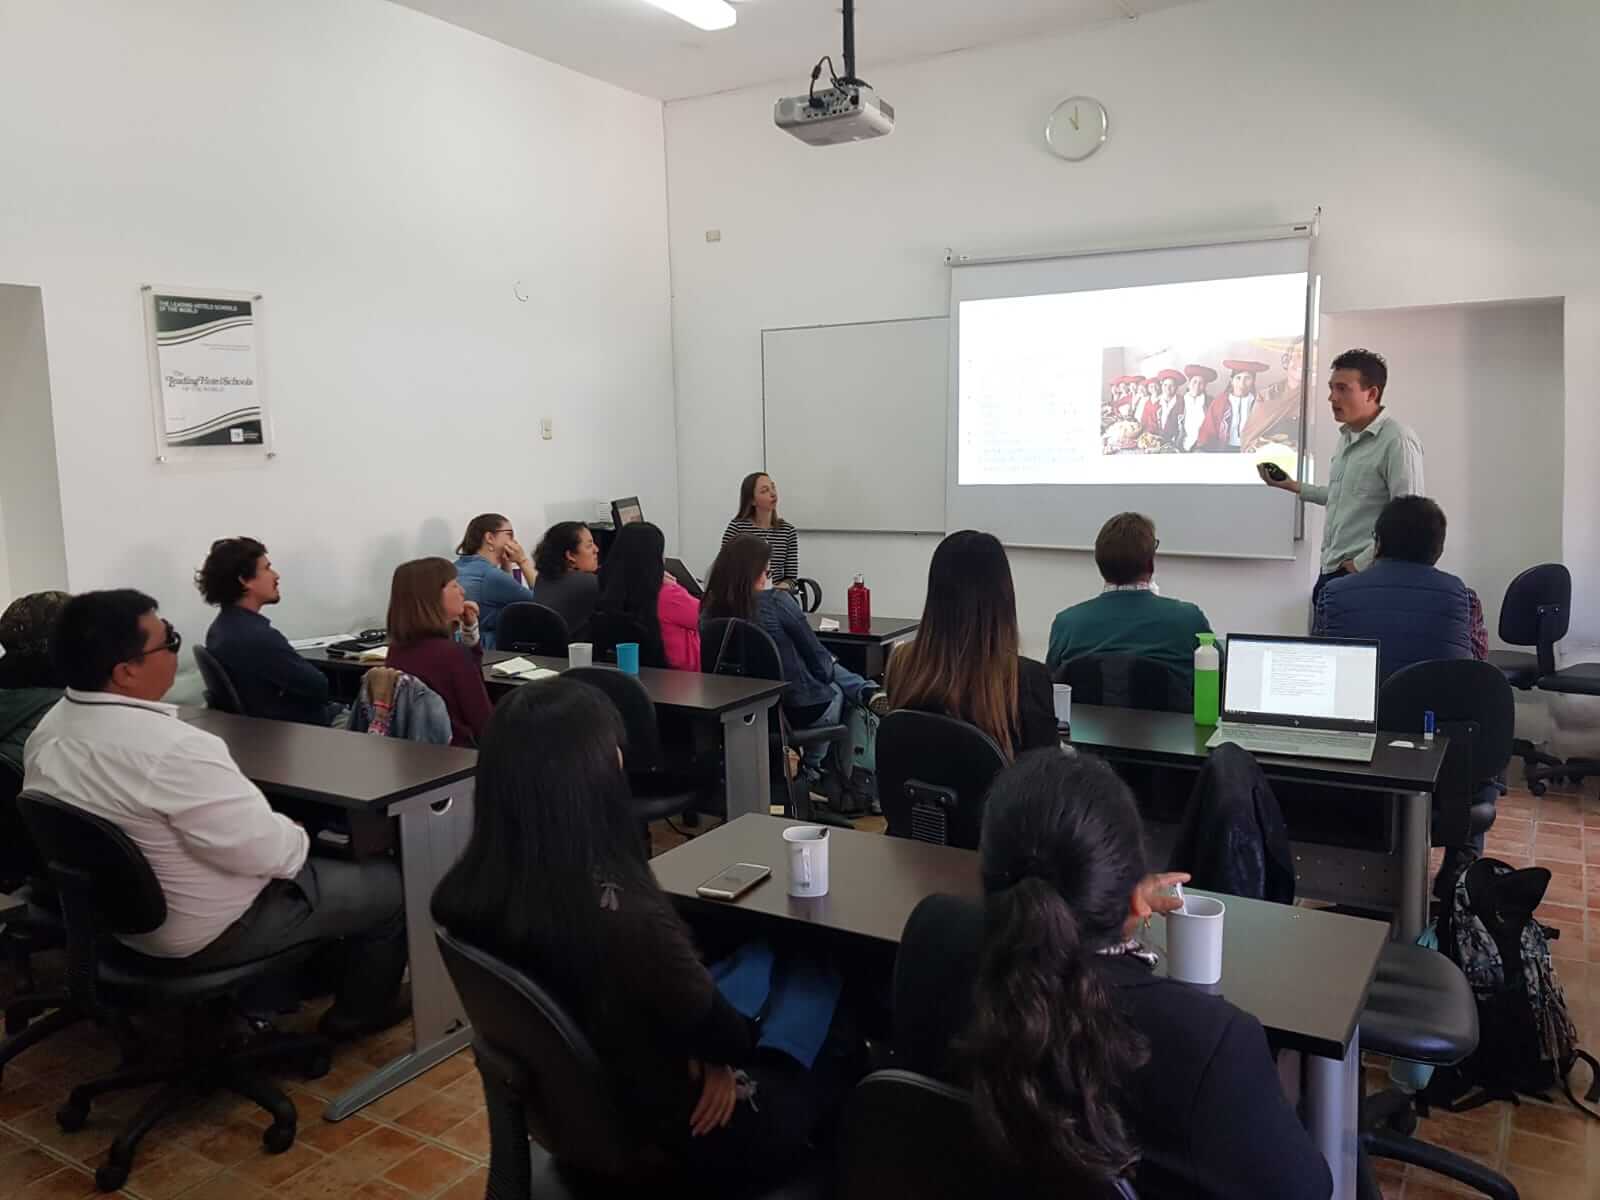 The RESPONSible Travel Peru team giving a workshop about sustainable tourism in Cusco, Peru